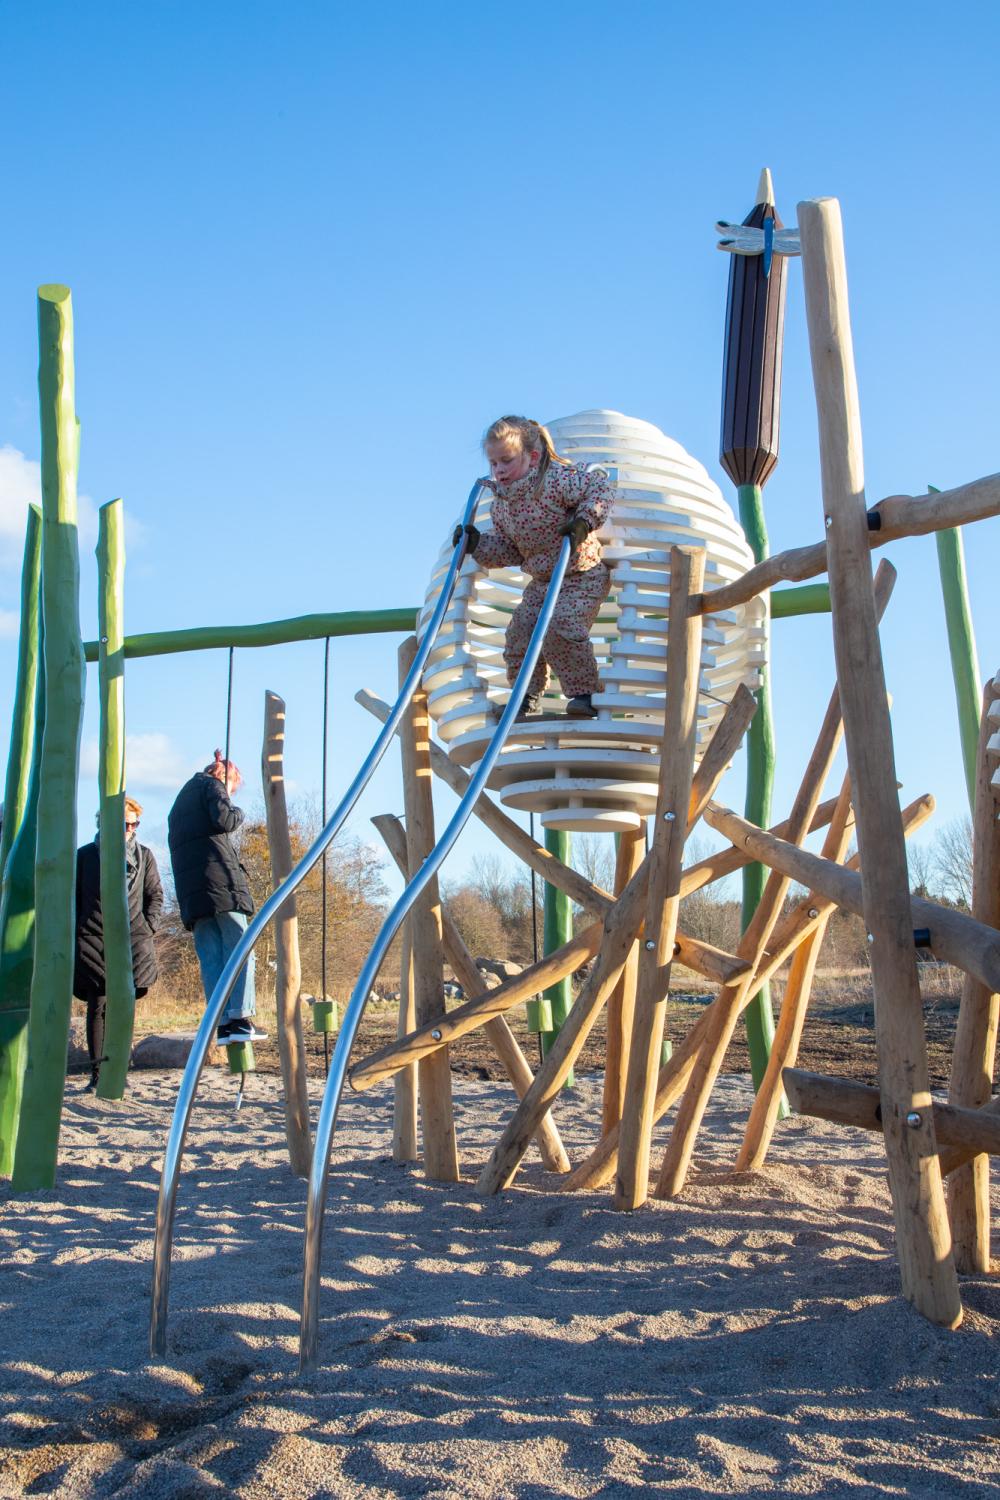 Girl about to slide down steel poles at playground